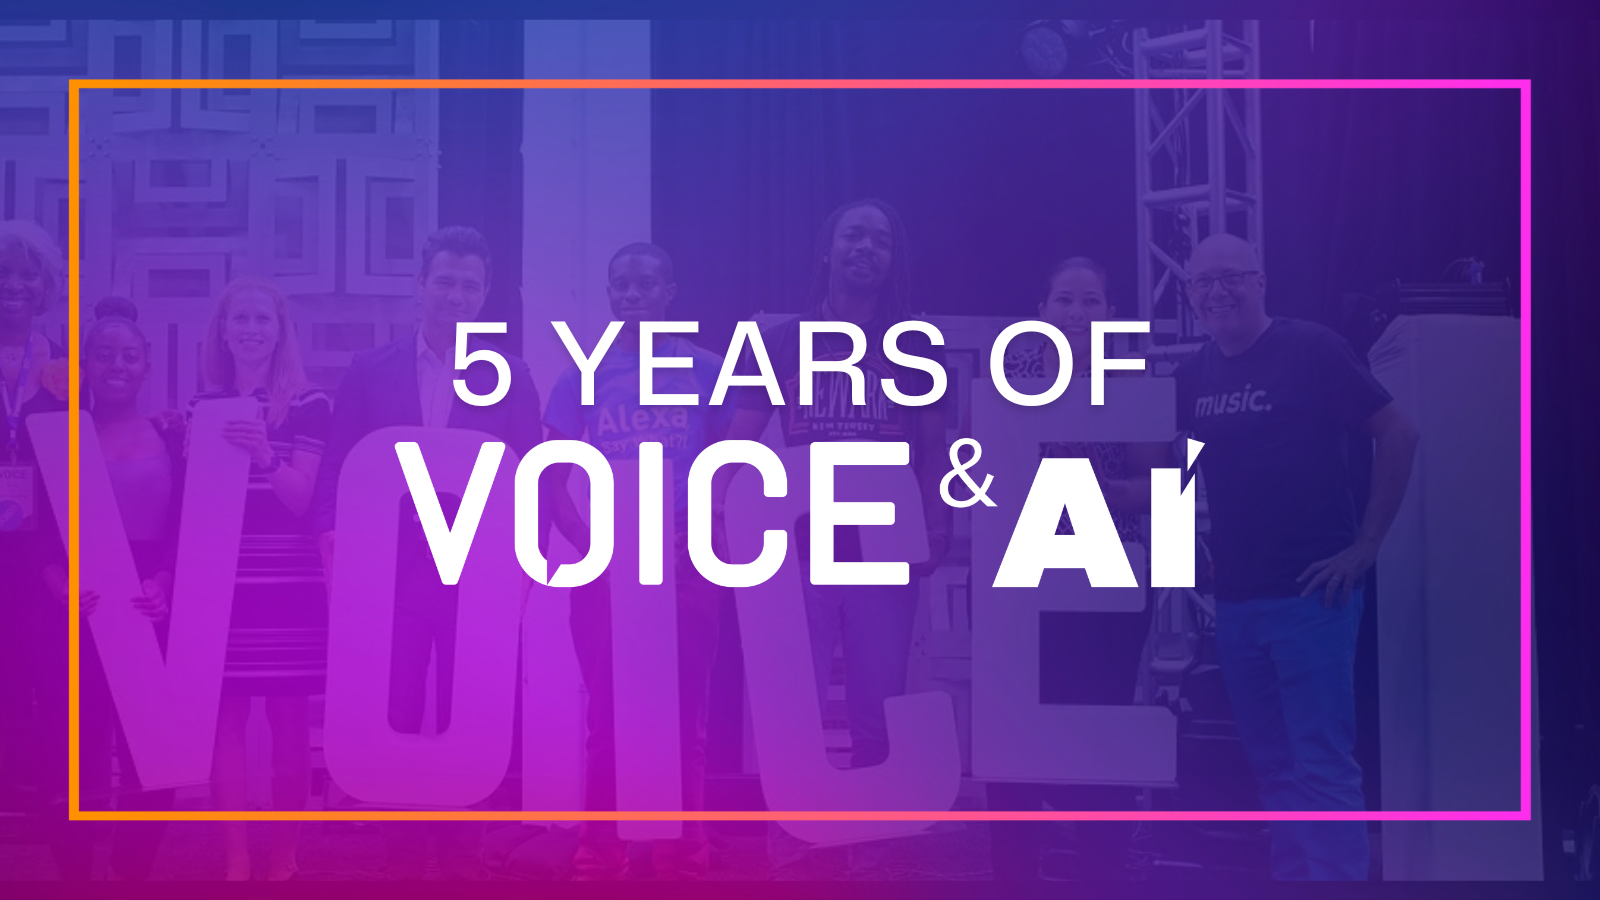 5 Years of VOICE & AI